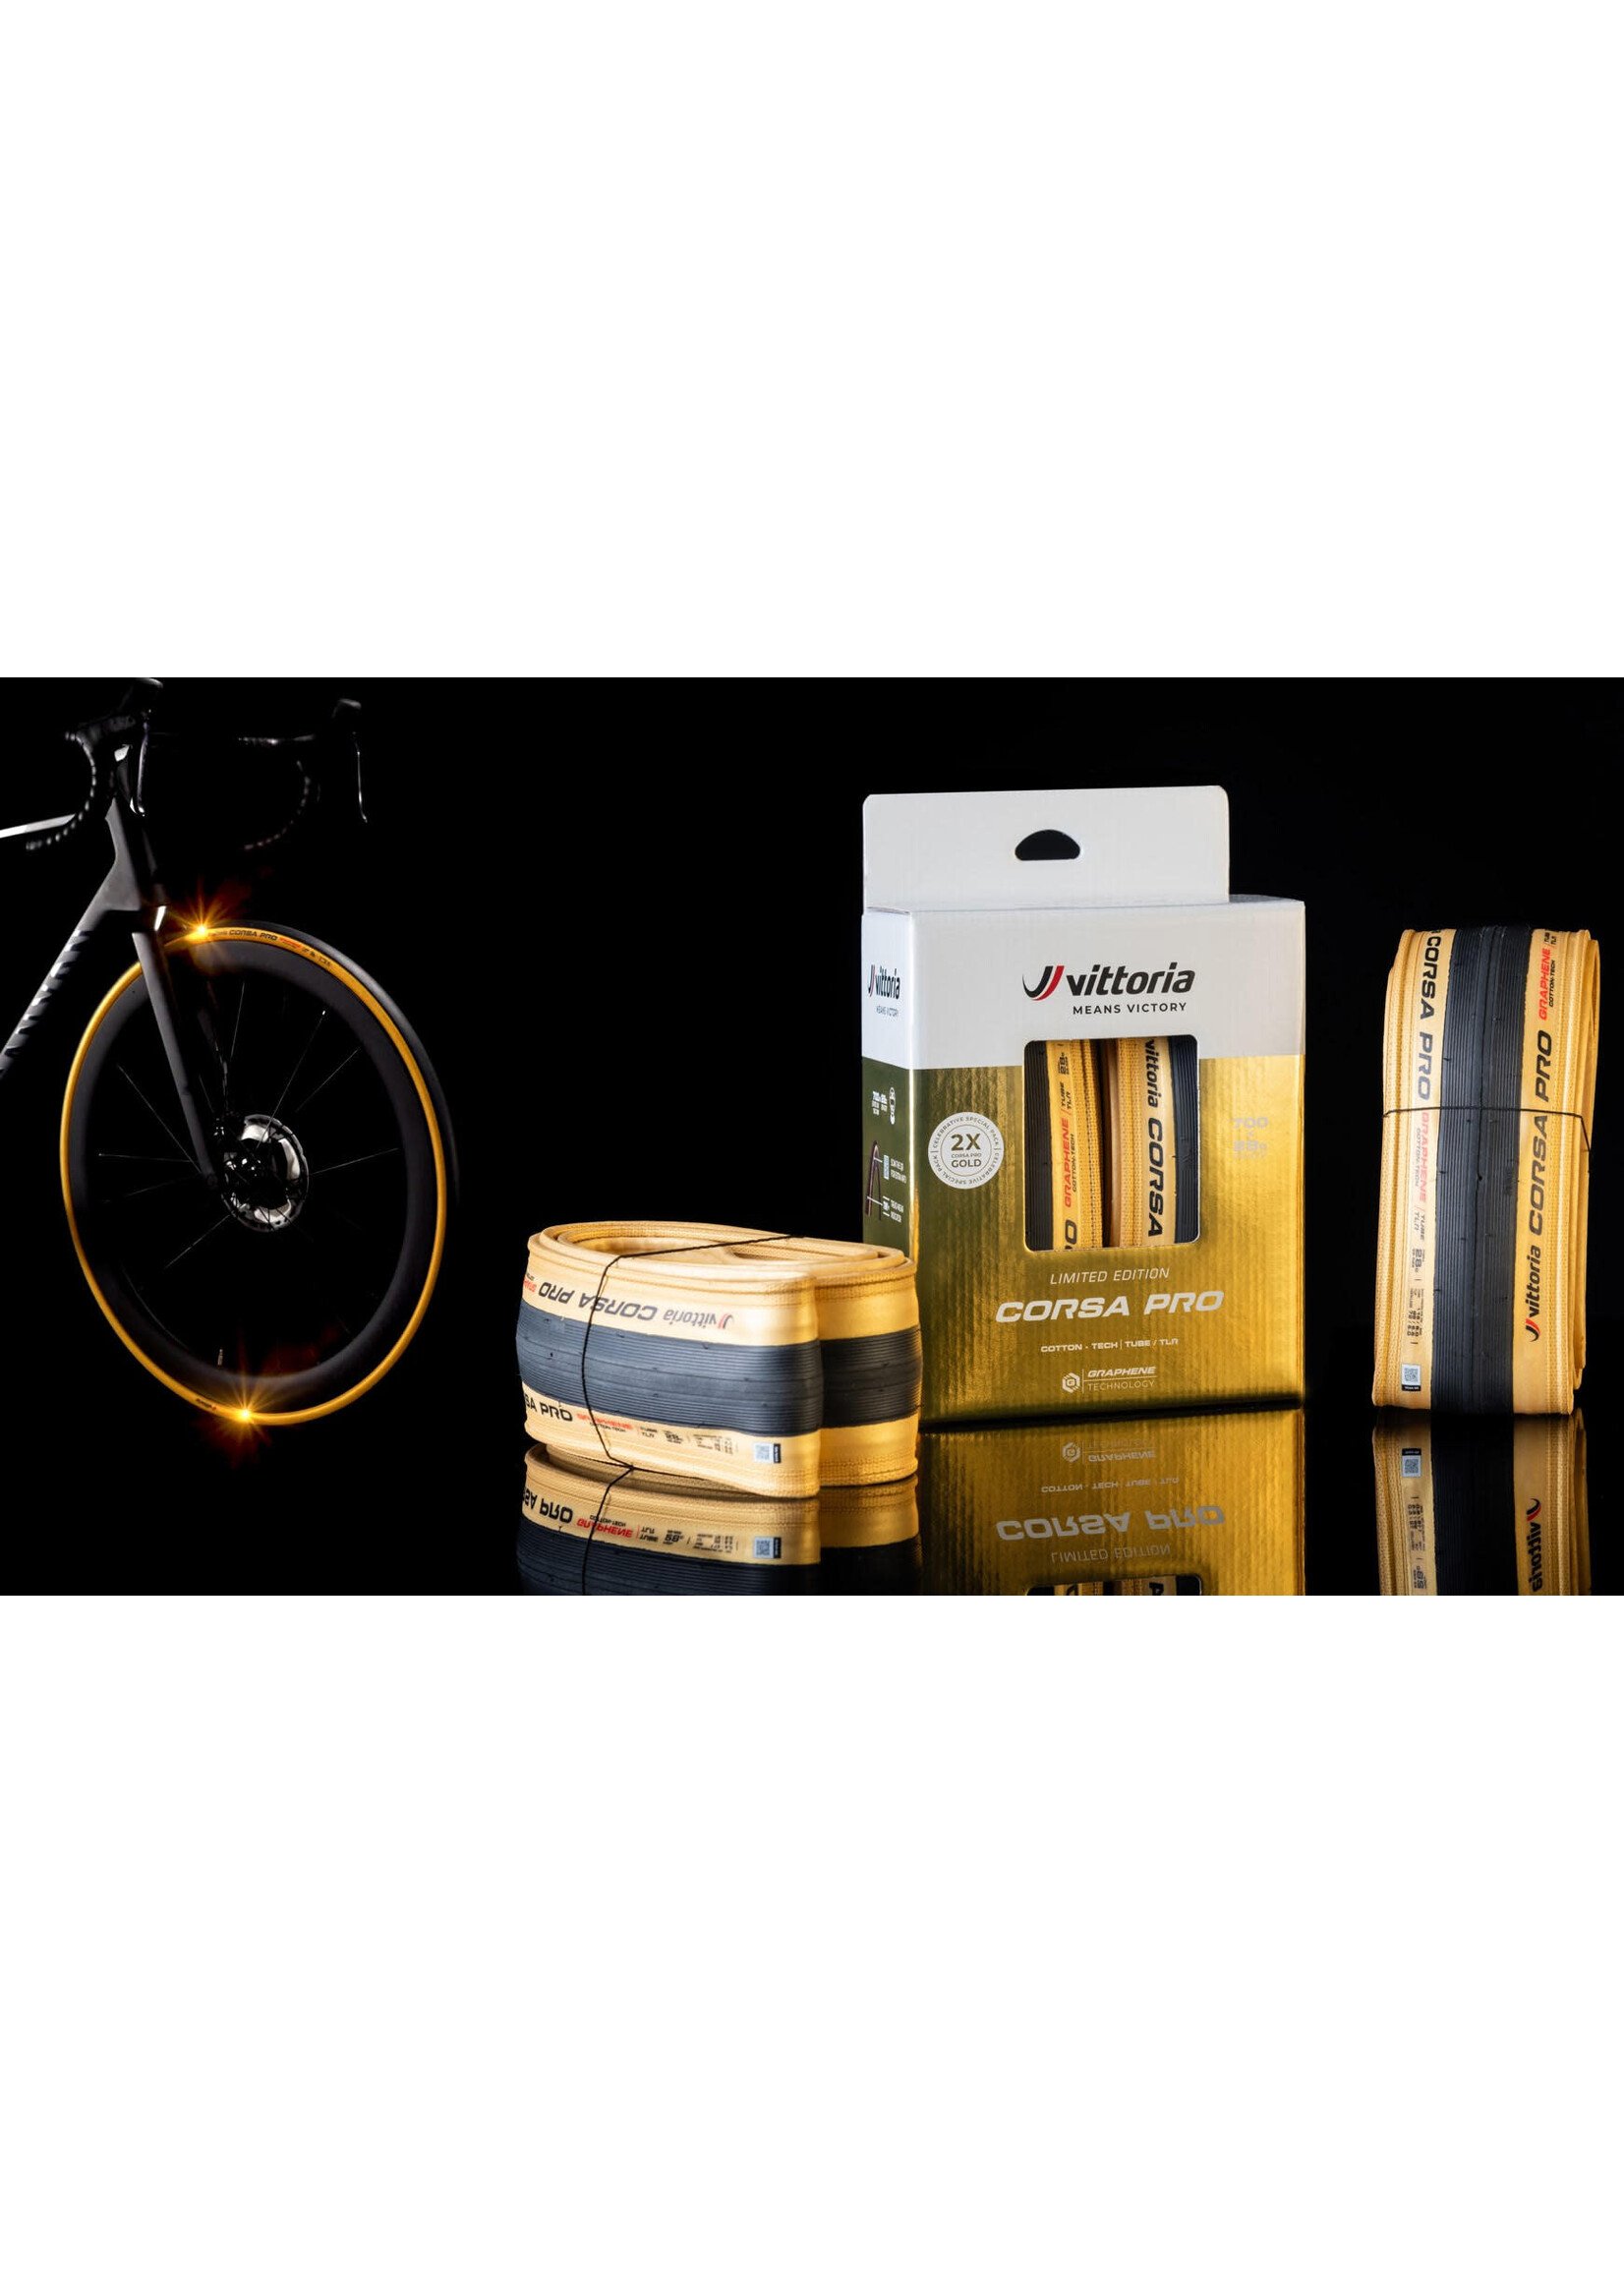 VITTORIA Double Pack Corsa Pro 28-622 fold TLR gold-blk-blk G2.0